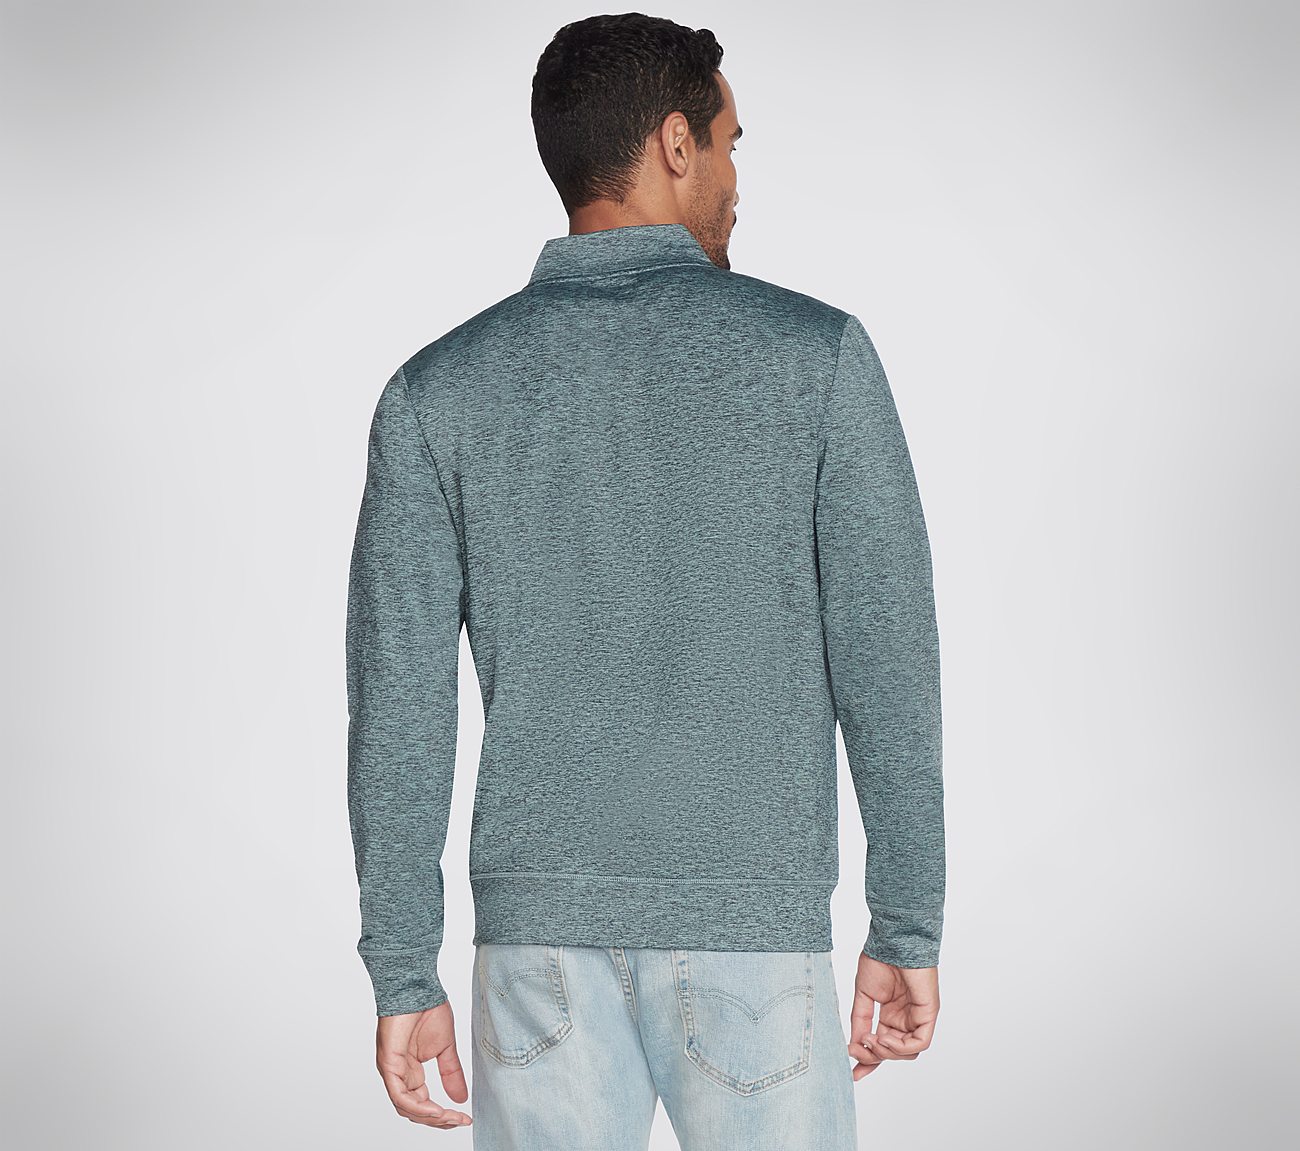 SKECH-KNITS ULTRA GO HOODLESS, TEAL/BLUE Apparel Top View